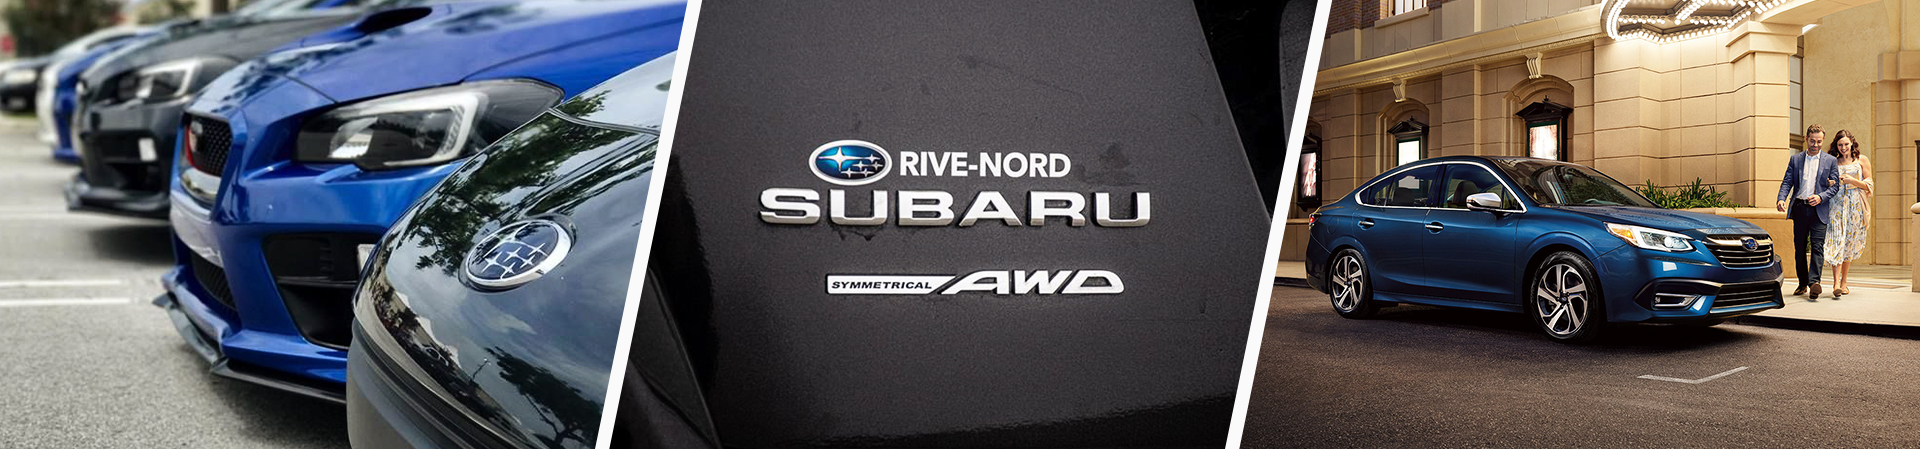 several subaru vehicles and one subaru car in front of a building on the north shore of montreal